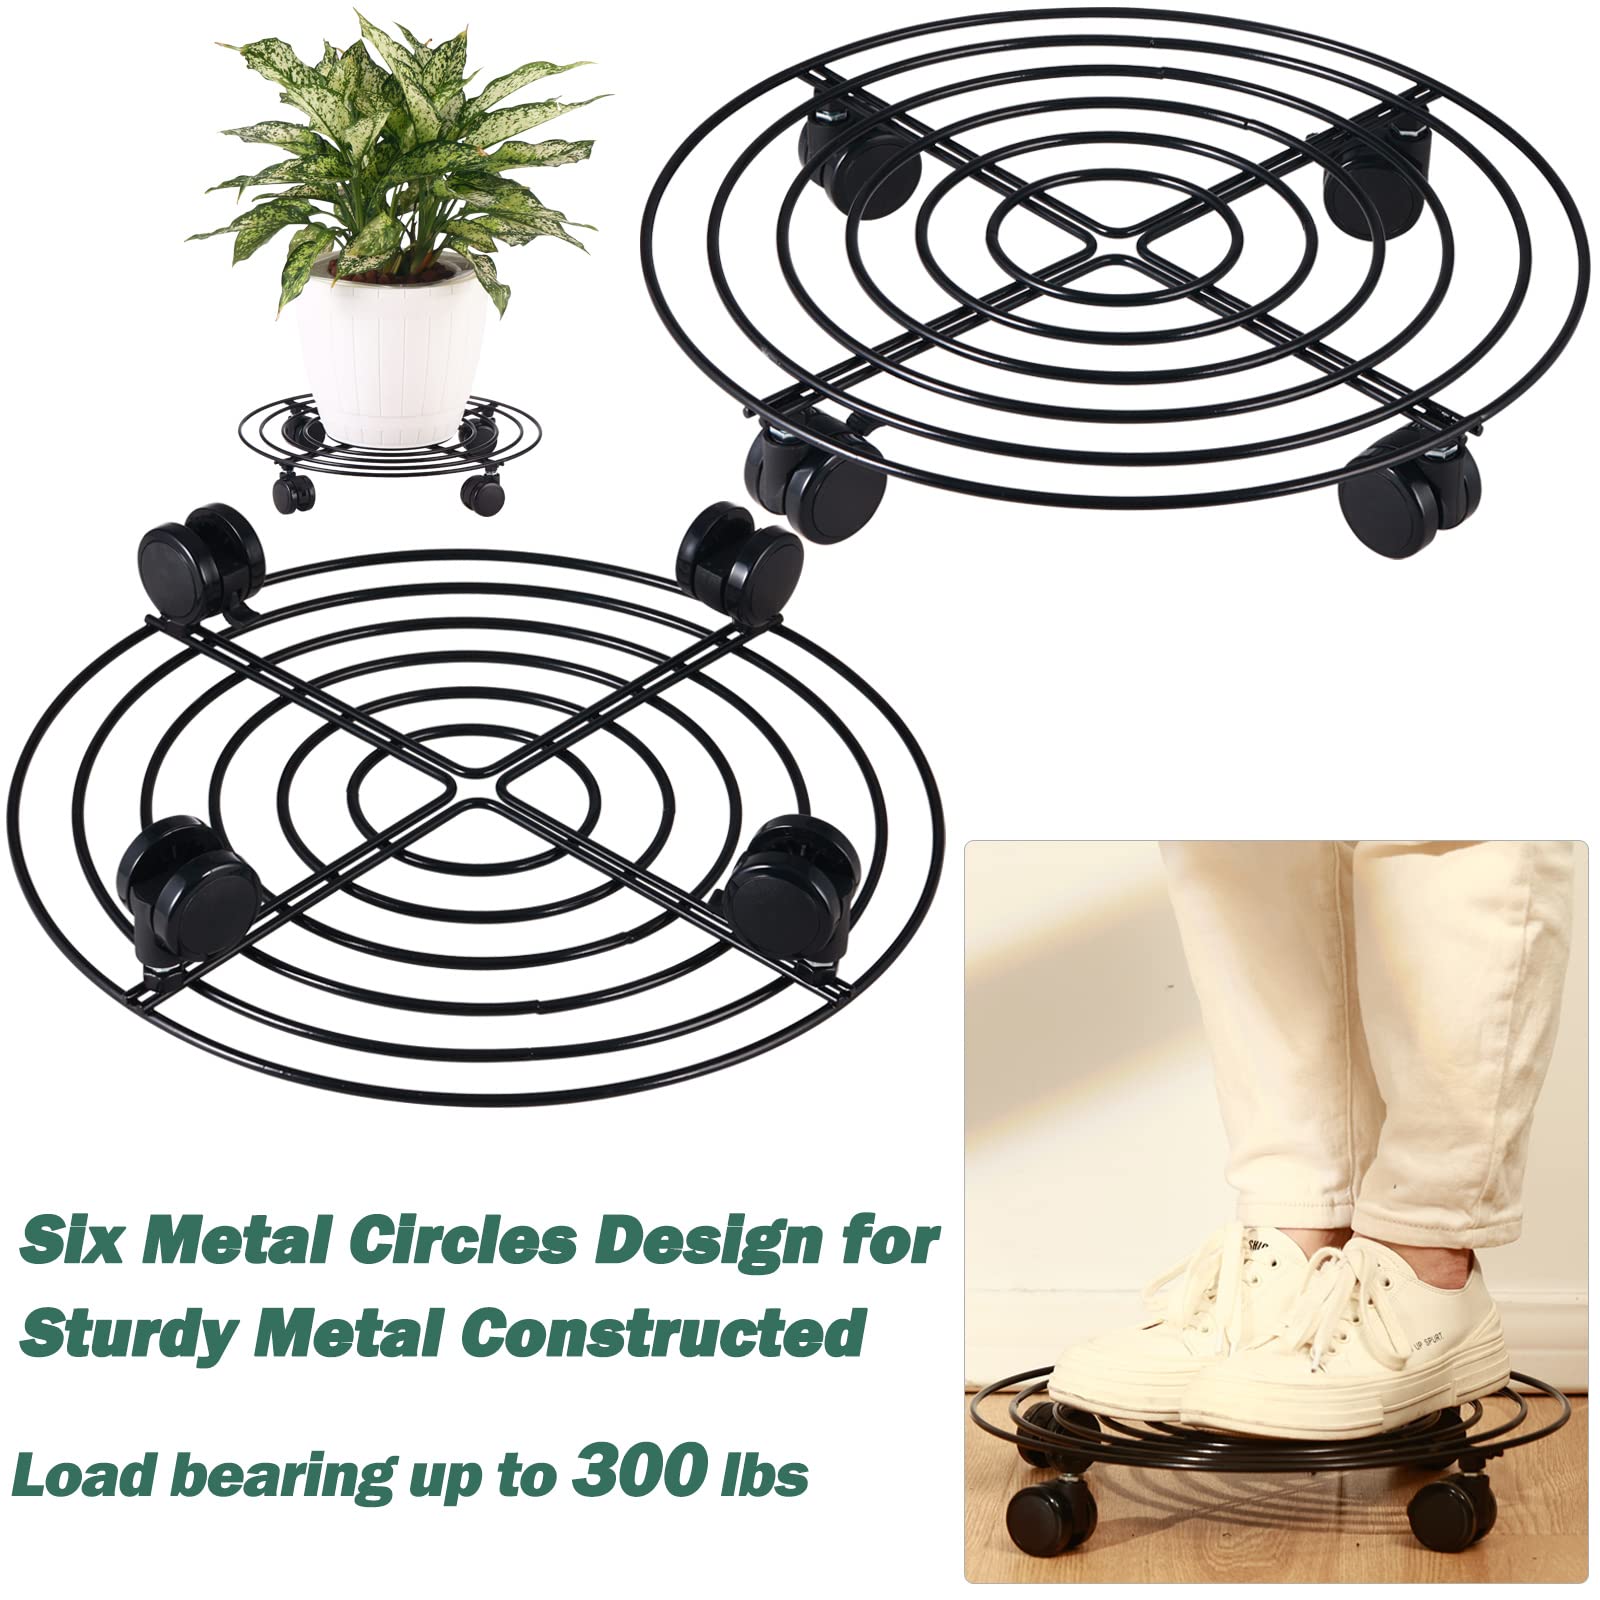 6 Packs Large Metal Plant Caddy with Wheels 14” Rolling Plant Stands Heavy-duty Wrought Iron Plant Roller Base Pot Movers Plant Saucer on Wheels Indoor Outdoor Plant Dolly with Casters Planter Tray